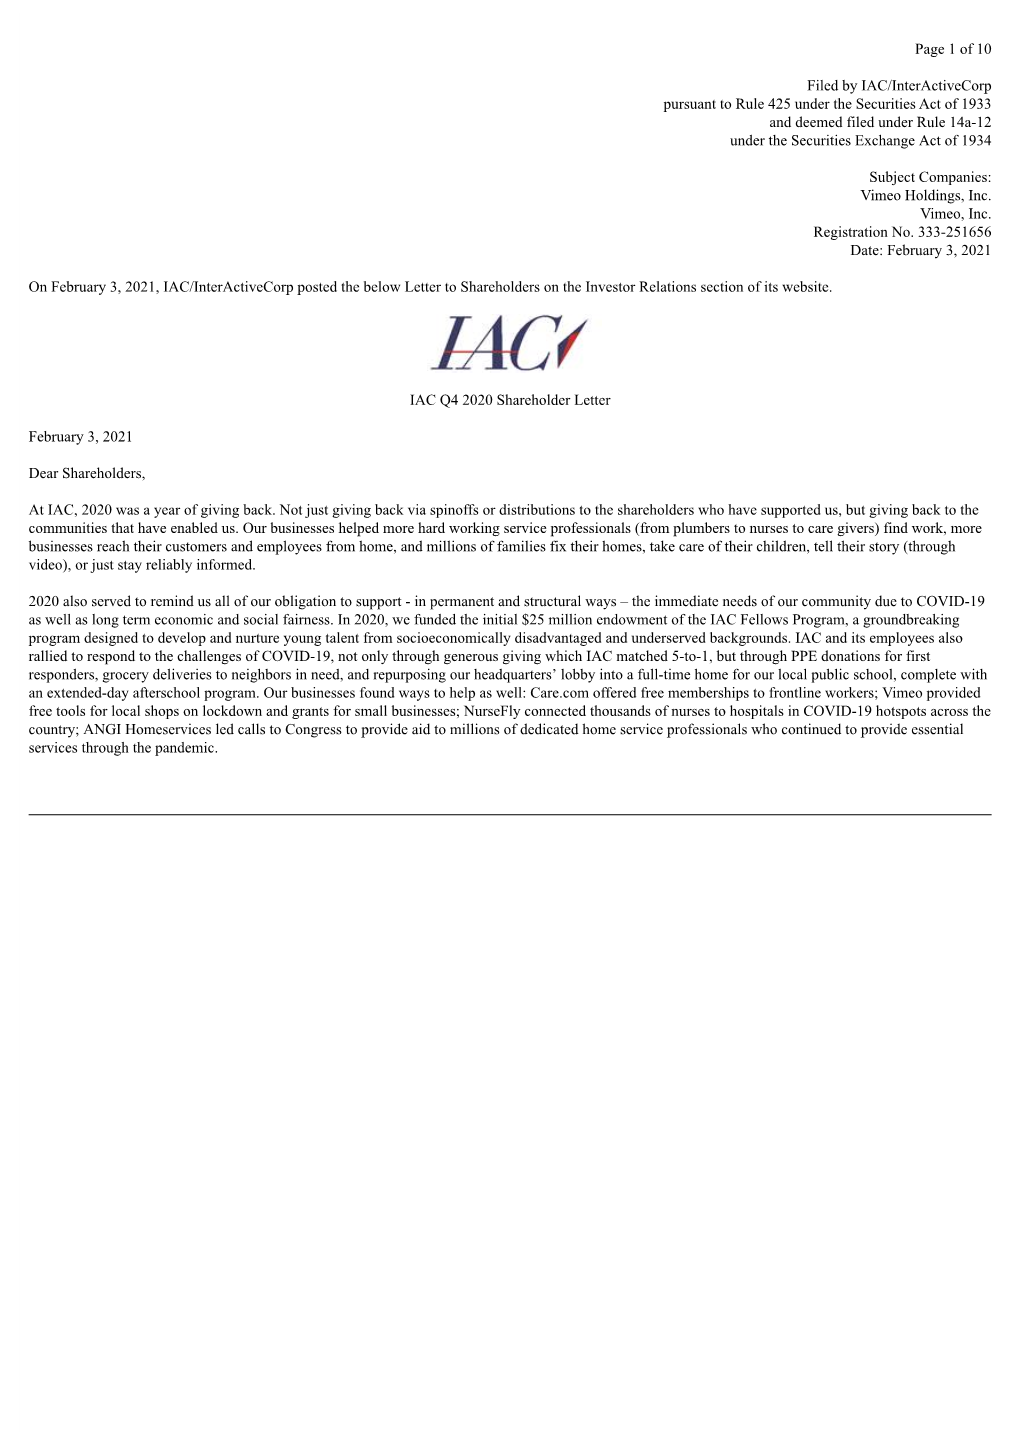 Of 10 Filed by IAC/Interactivecorp Pursuant to Rule